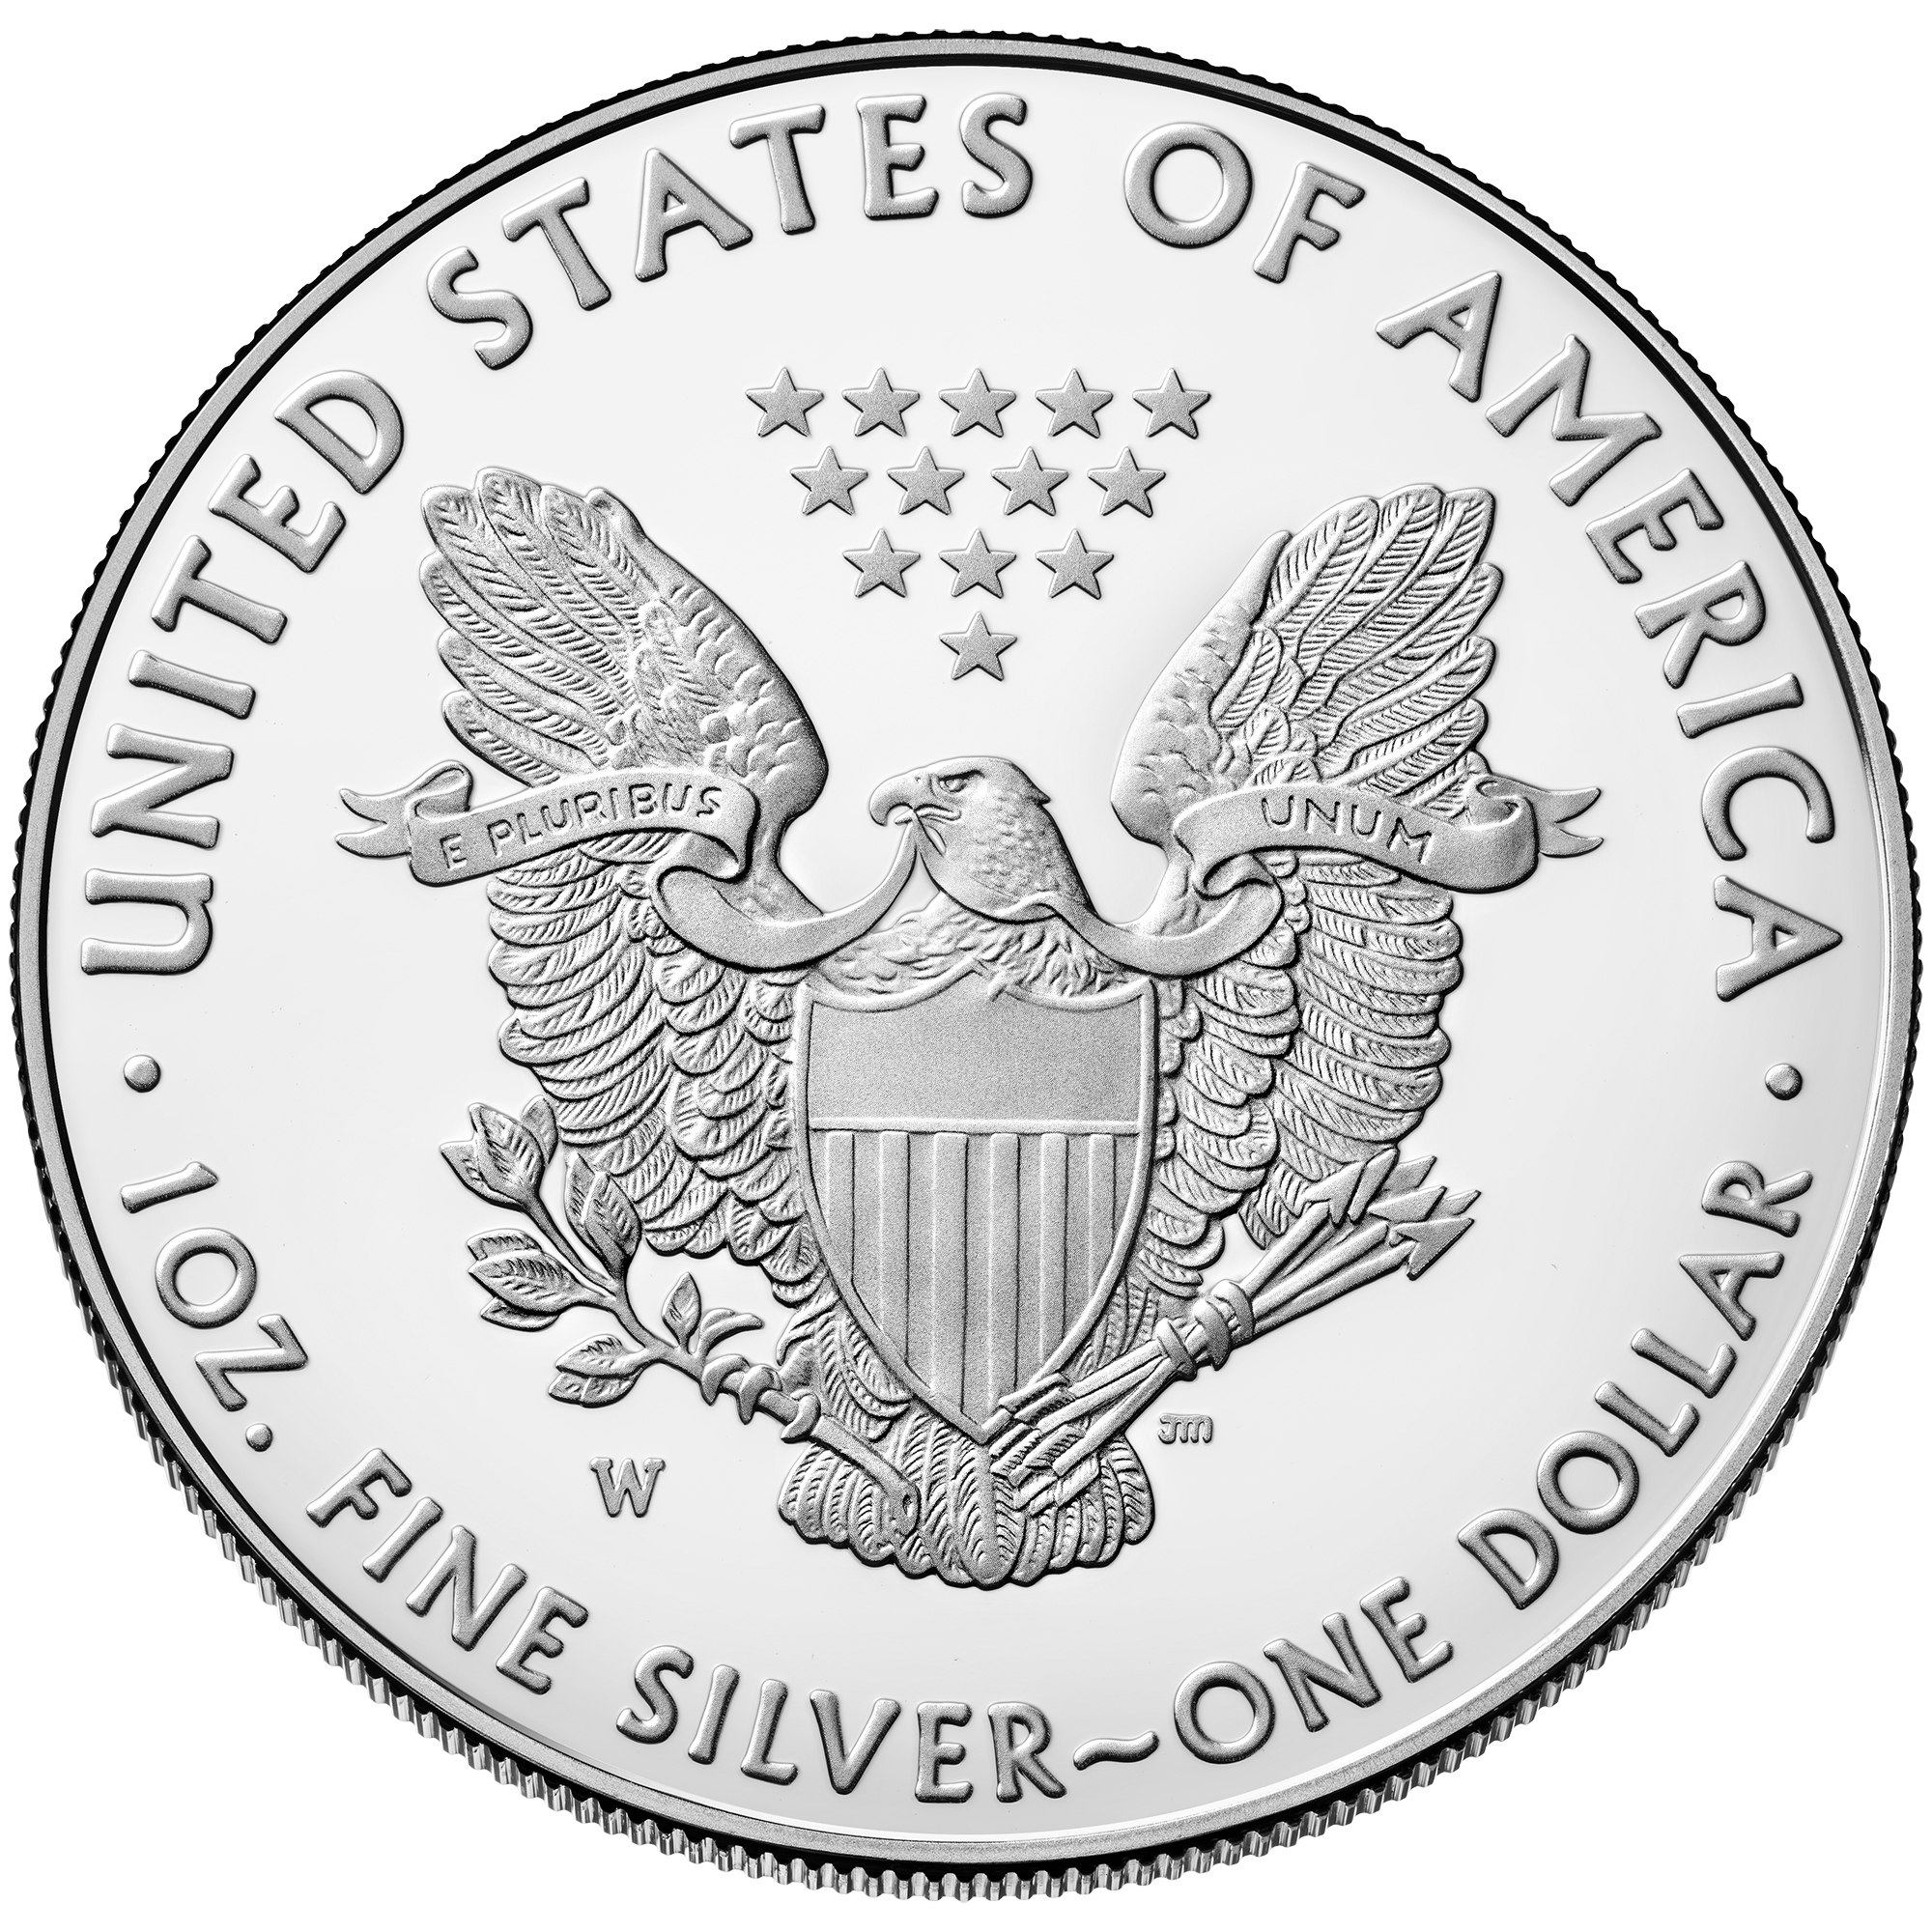 enlarged image for 2019 American Eagle One Ounce Silver Proof Coin Goes on Sale on January 10